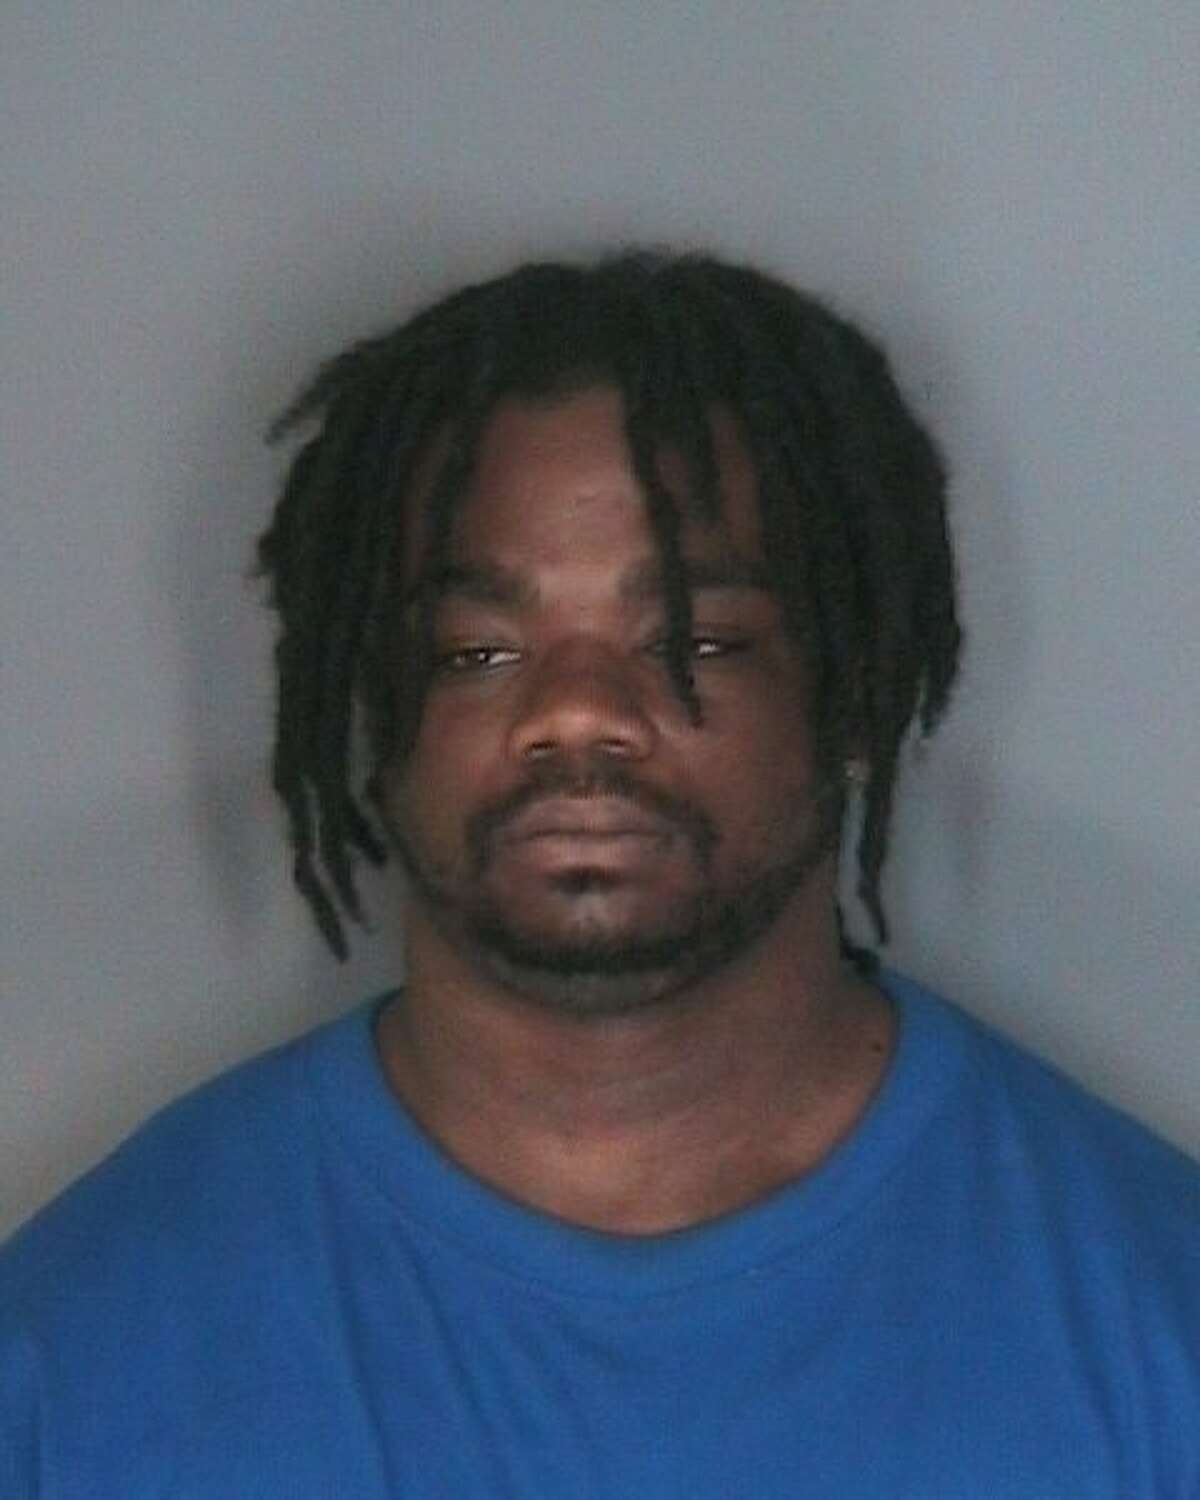 Victor Williams Jr. (Albany County Sheriff's Office photo)